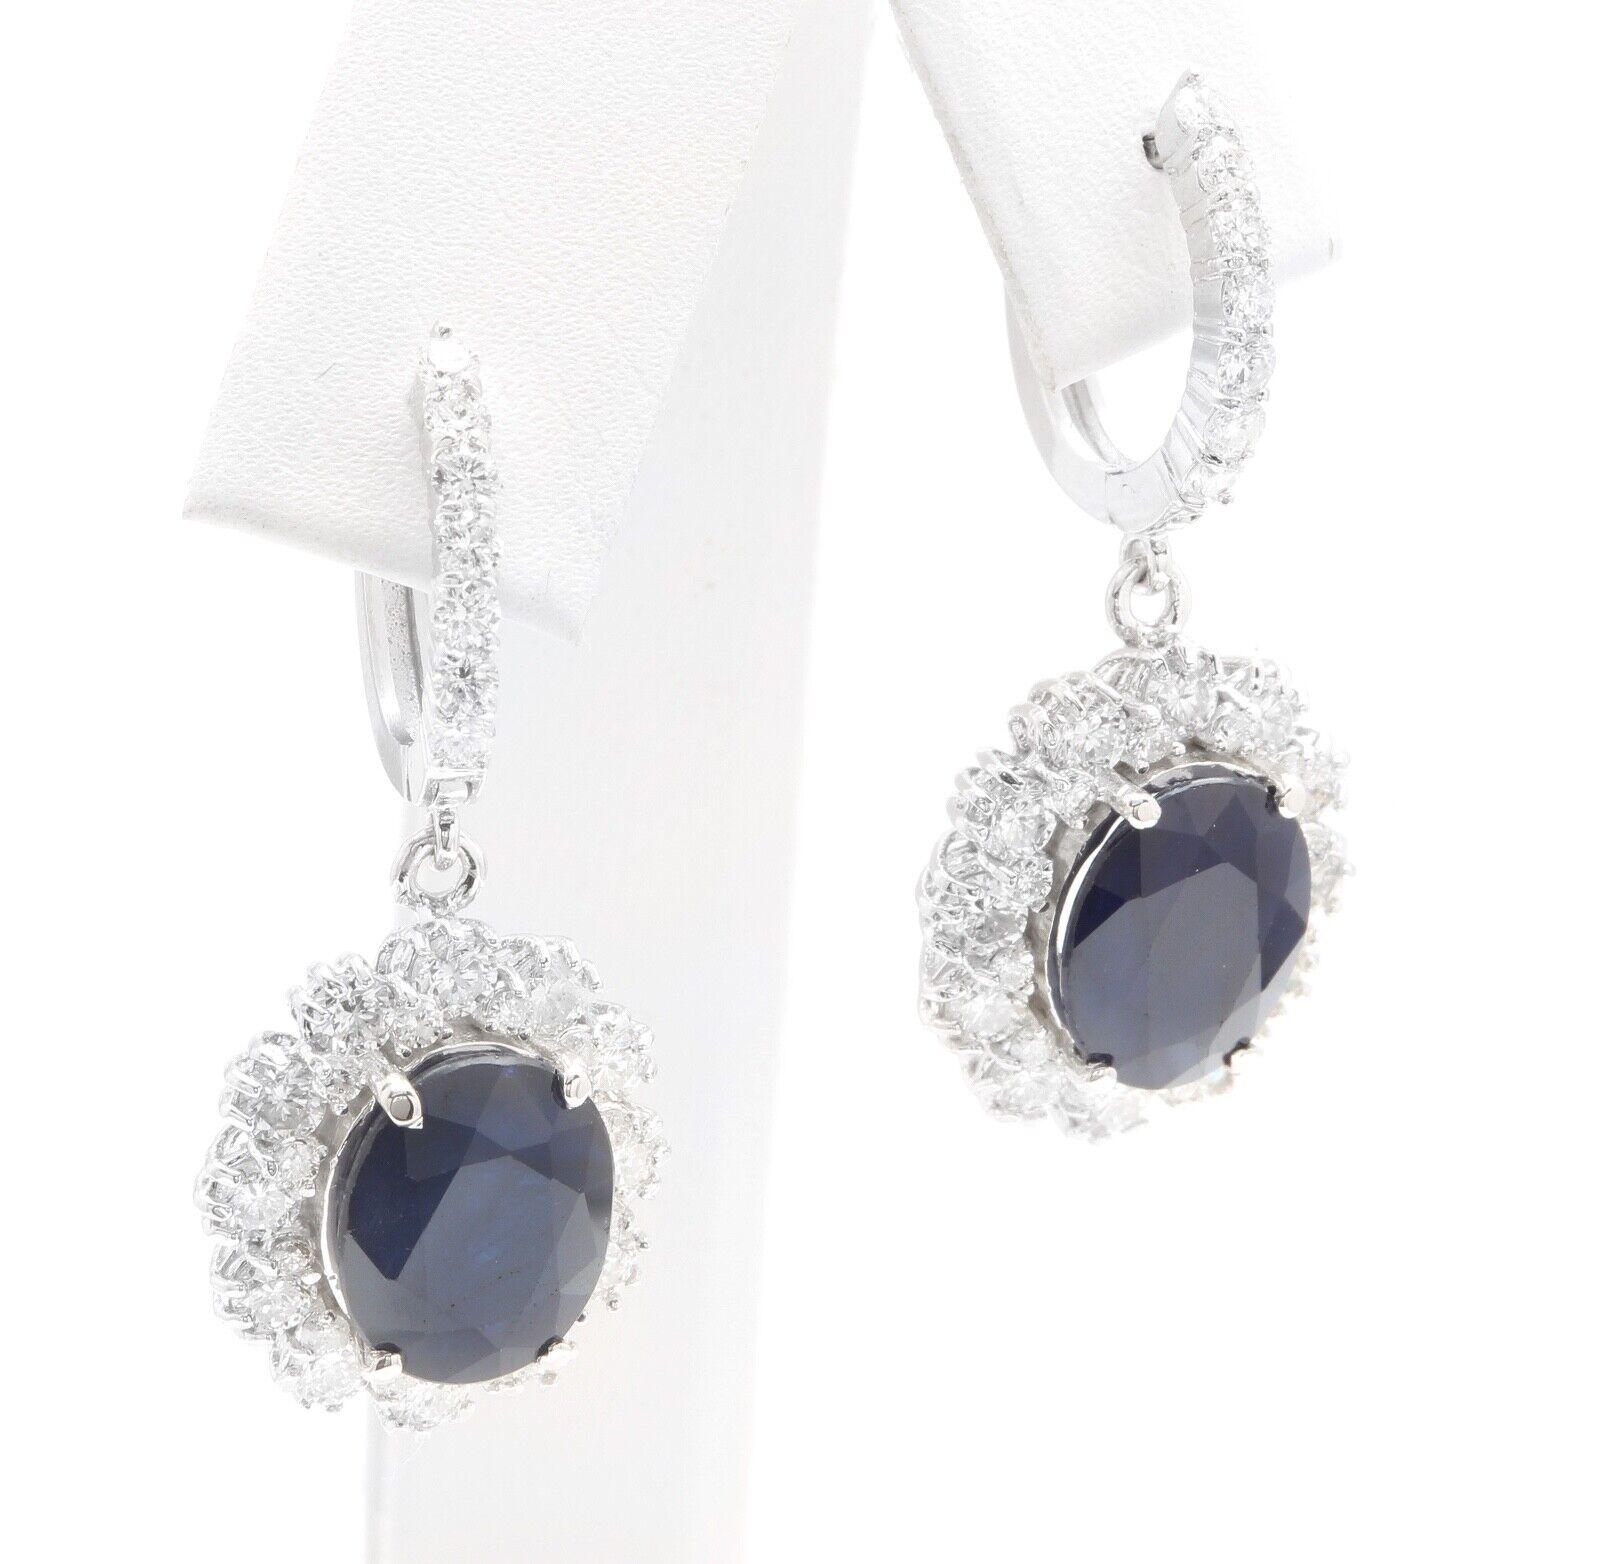 Exquisite 12.30 Carats Natural Sapphire and Diamond 14K Solid White Gold Earrings

Amazing looking piece! 

Suggested Replacement Value: Approx. $7,000.00 

Total Natural Round Cut White Diamonds Weight: Approx. 2.30 Carats (color G-H / Clarity